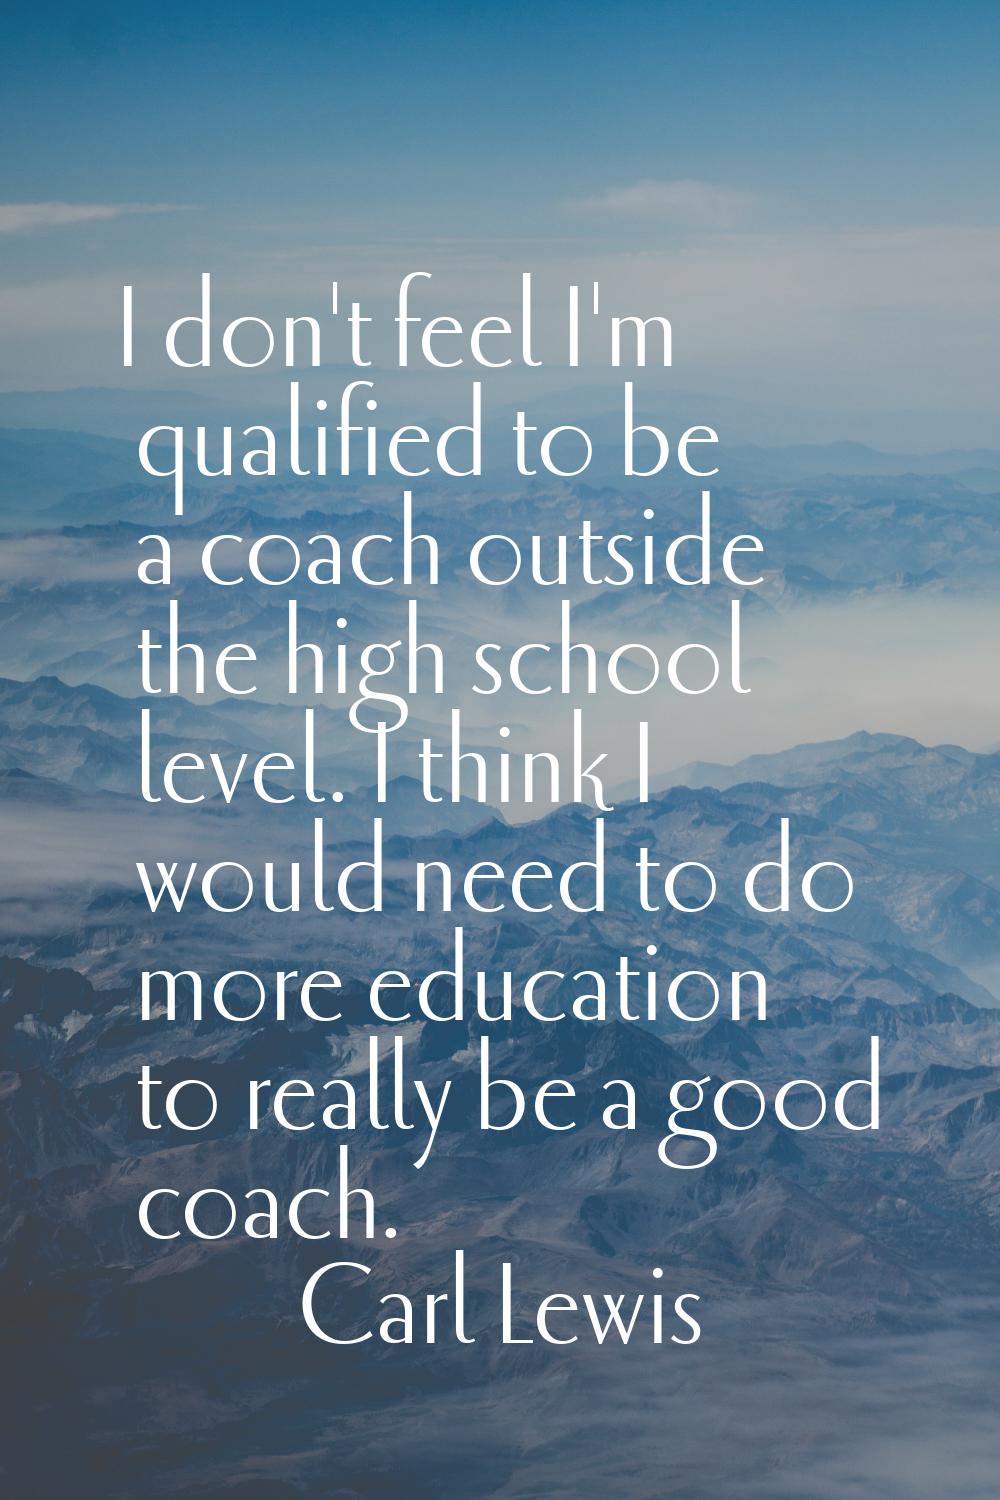 I don't feel I'm qualified to be a coach outside the high school level. I think I would need to do 